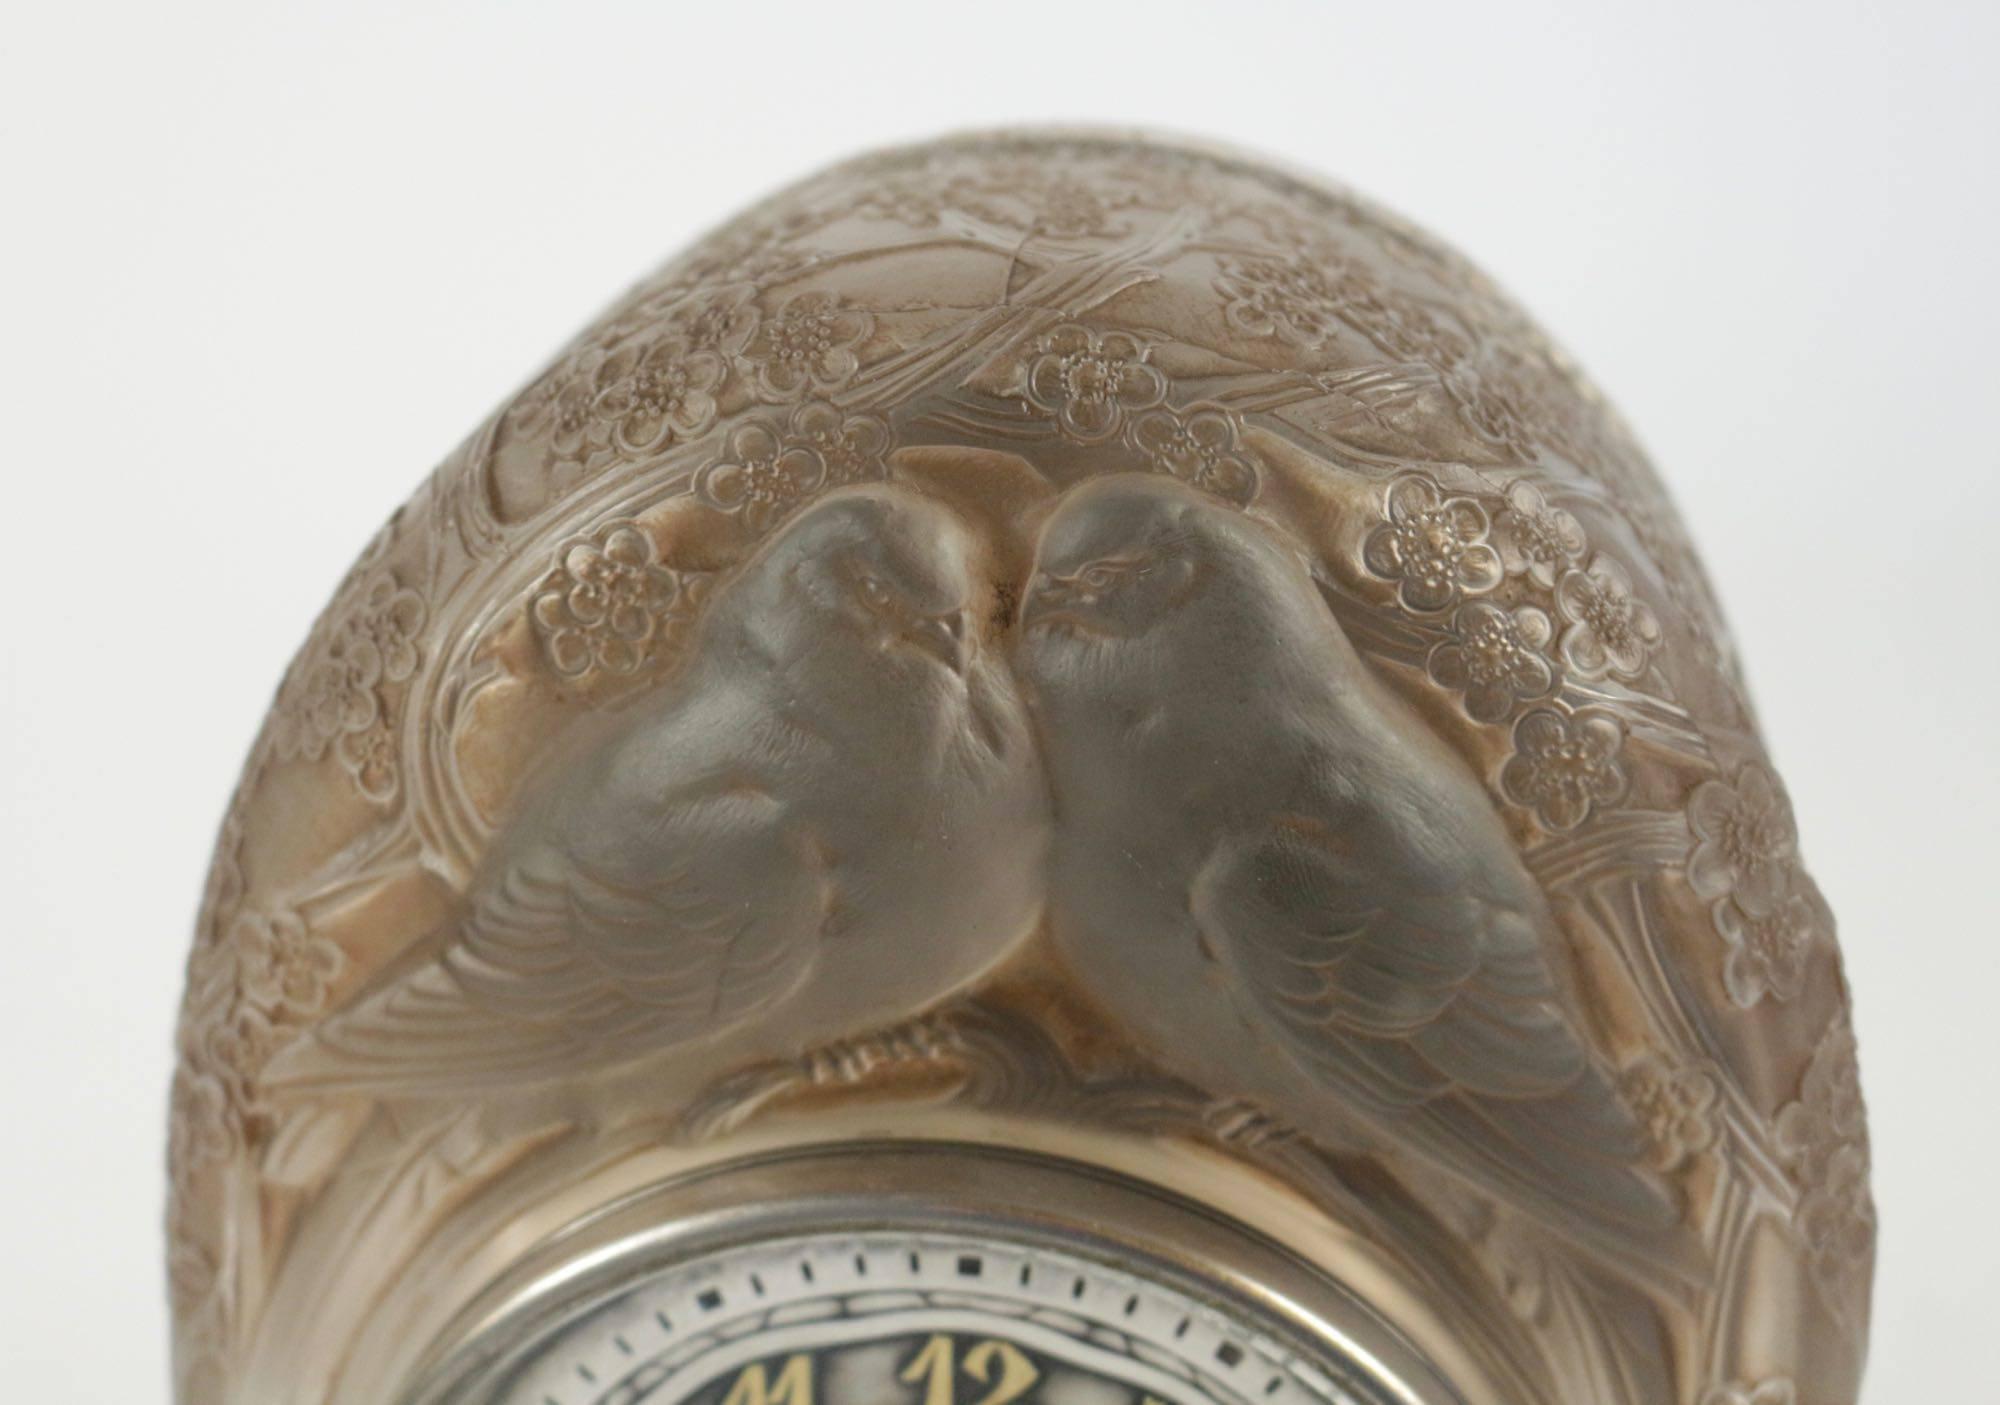 Deux colombes, a moulded-pressed satiny glass mile-stone clock with a Maison ATO milestone dial.
Highlighted with sienna stain.
 Two perched birds on branches and foliage motif under a dome shaped.
Signed R.Lalique, France.
Model created in